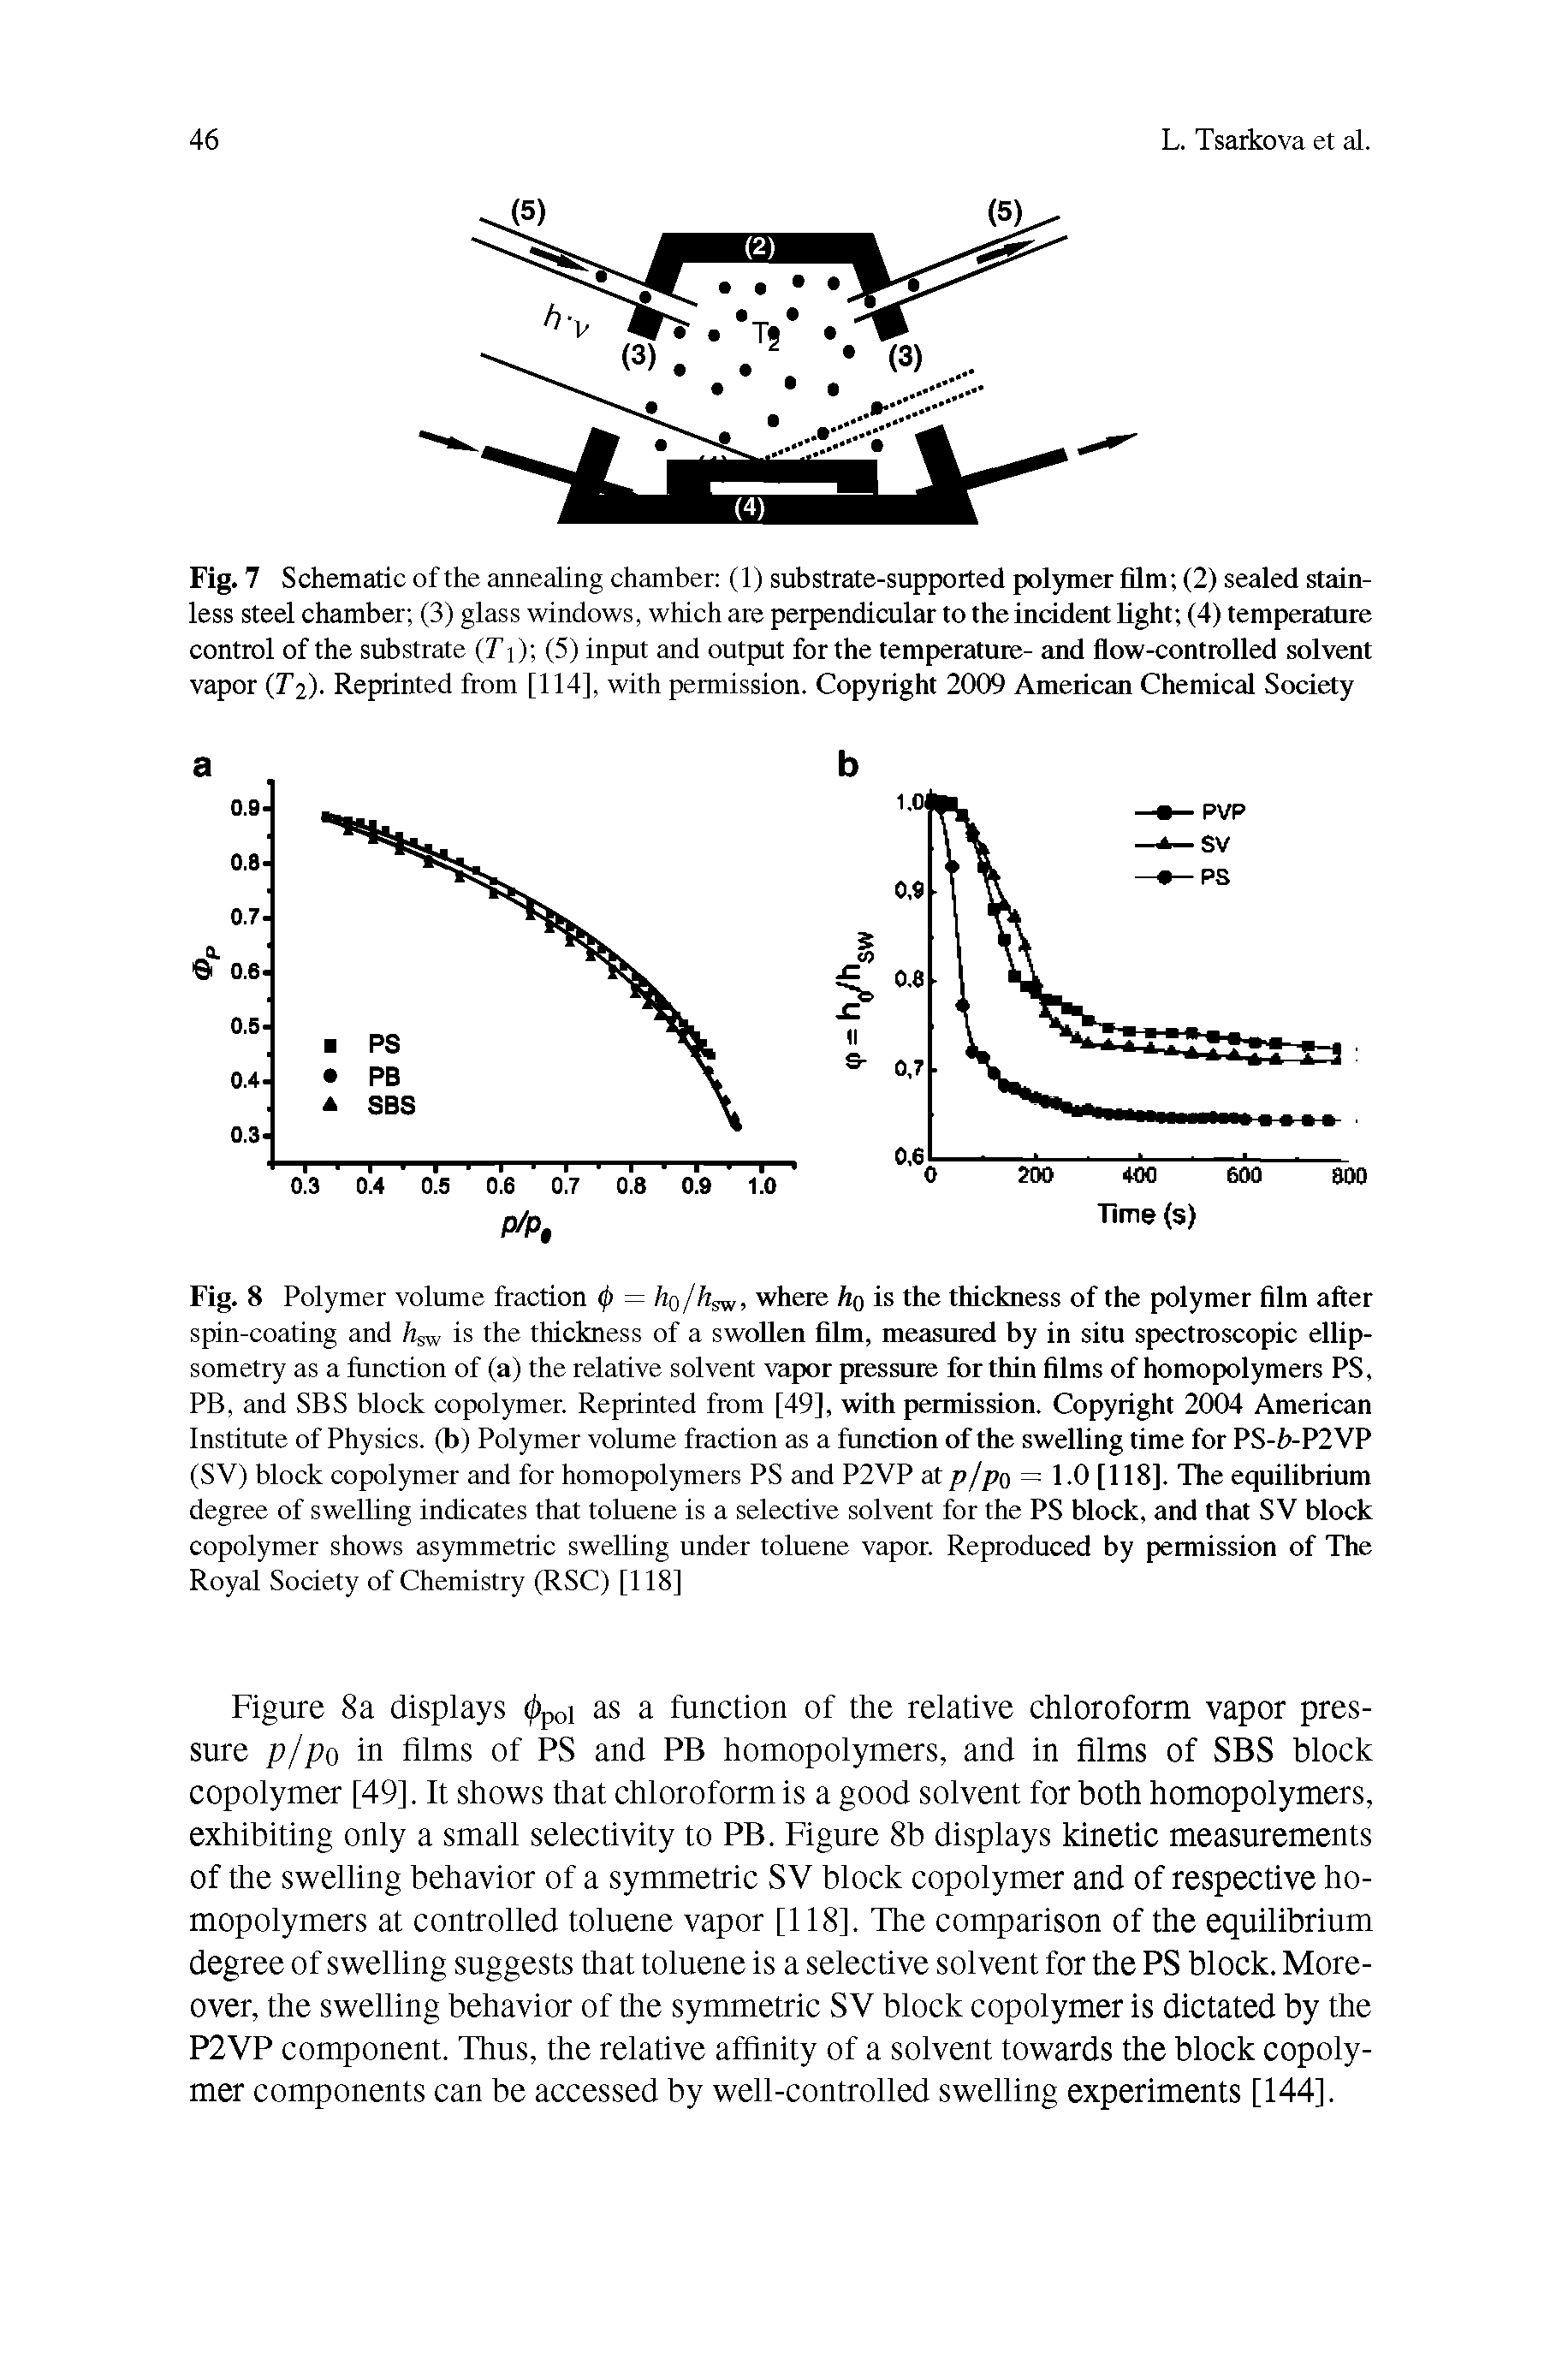 Fig. 8 Polymer volume fraction (j) = ho//t,w, where ho is the thickness of the polymer film after spin-coating and hsw is the thickness of a swollen film, measured by in situ spectroscopic ellip-sometry as a function of (a) the relative solvent vapor pressure for thin films of homopolymers PS, PB, and SBS block copolymer. Reprinted from [49], with permission. Copyright 2004 American Institute of Physics, (b) Polymer volume fraction as a function of the swelling time for PS- >-P2VP (SV) block copolymer and for homopolymers PS and P2VP at p/po = 1.0 [118]. The equilibrium degree of swelling indicates that toluene is a selective solvent for the PS block, and that SV block copolymer shows asymmetric swelling under toluene vapor. Reproduced by permission of The Royal Society of Chemistry (RSC) [118]...